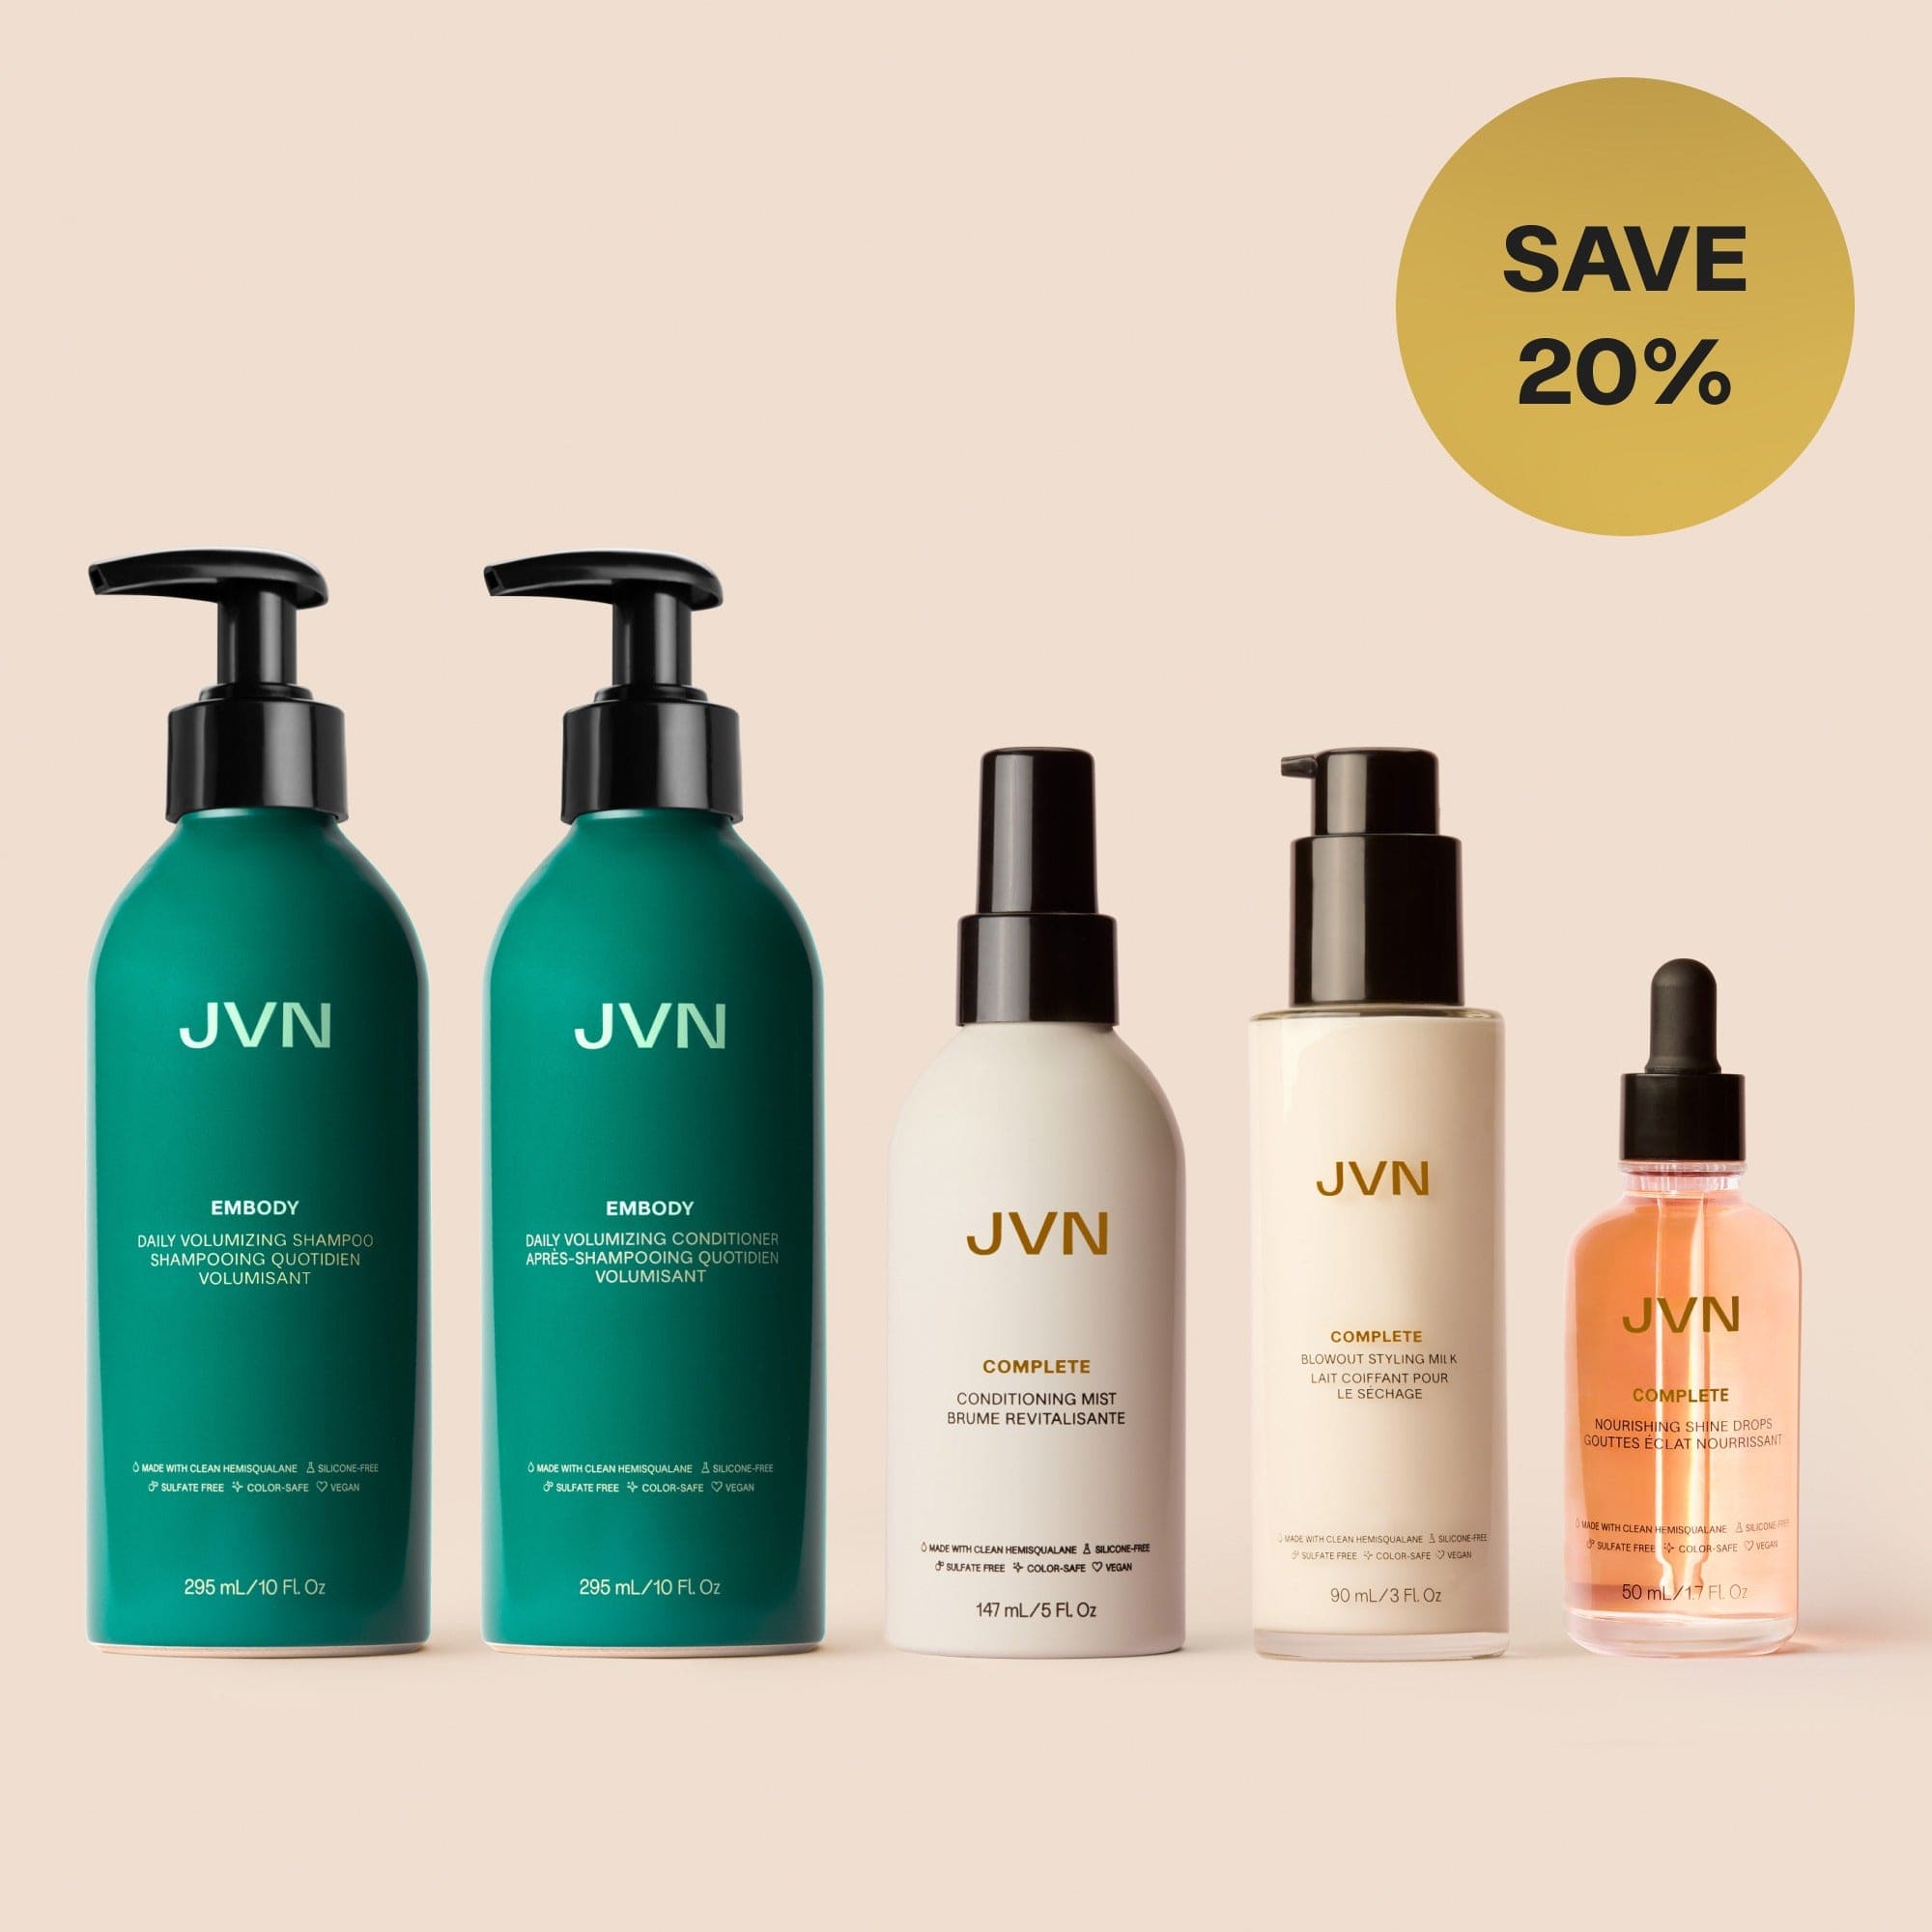 JVN sets product Sleek & Smooth Blowout Routine Smooth & Soft Blowout Routine | Products For Sleek Hair sulfate-free silicone-free sustainable